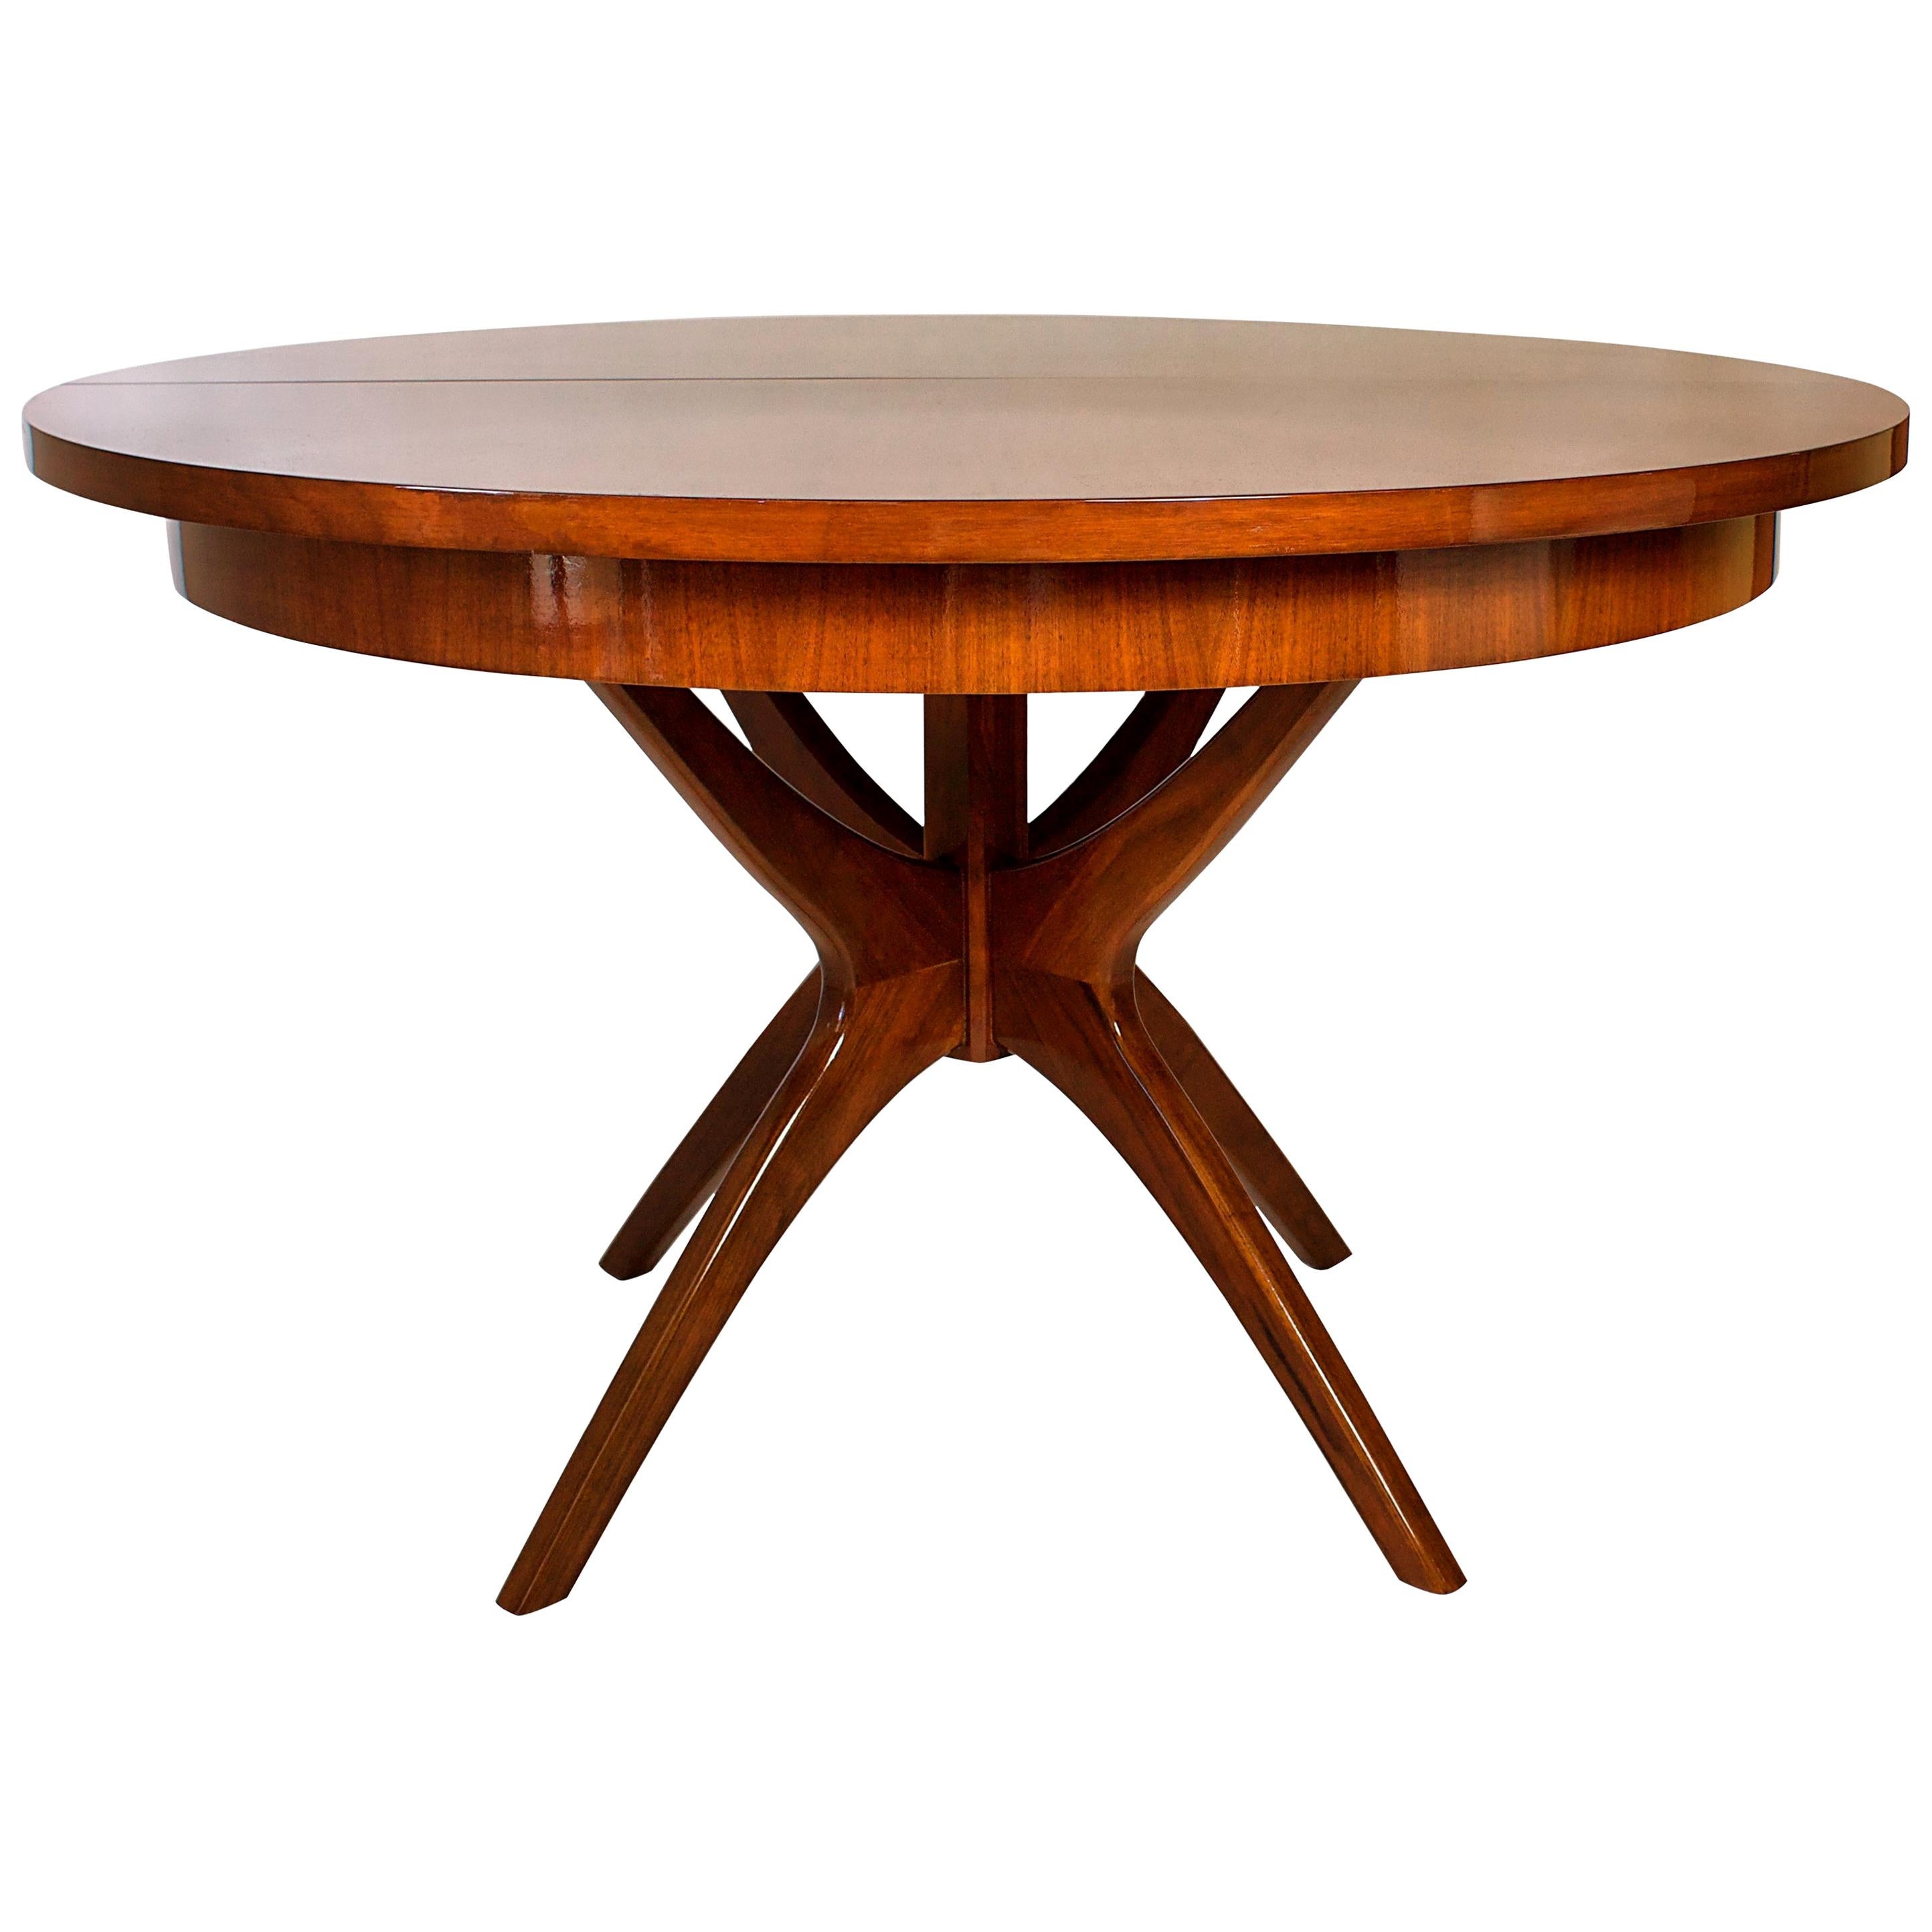 American Modern Walnut Extension Dining Table, Adrian Pearsall